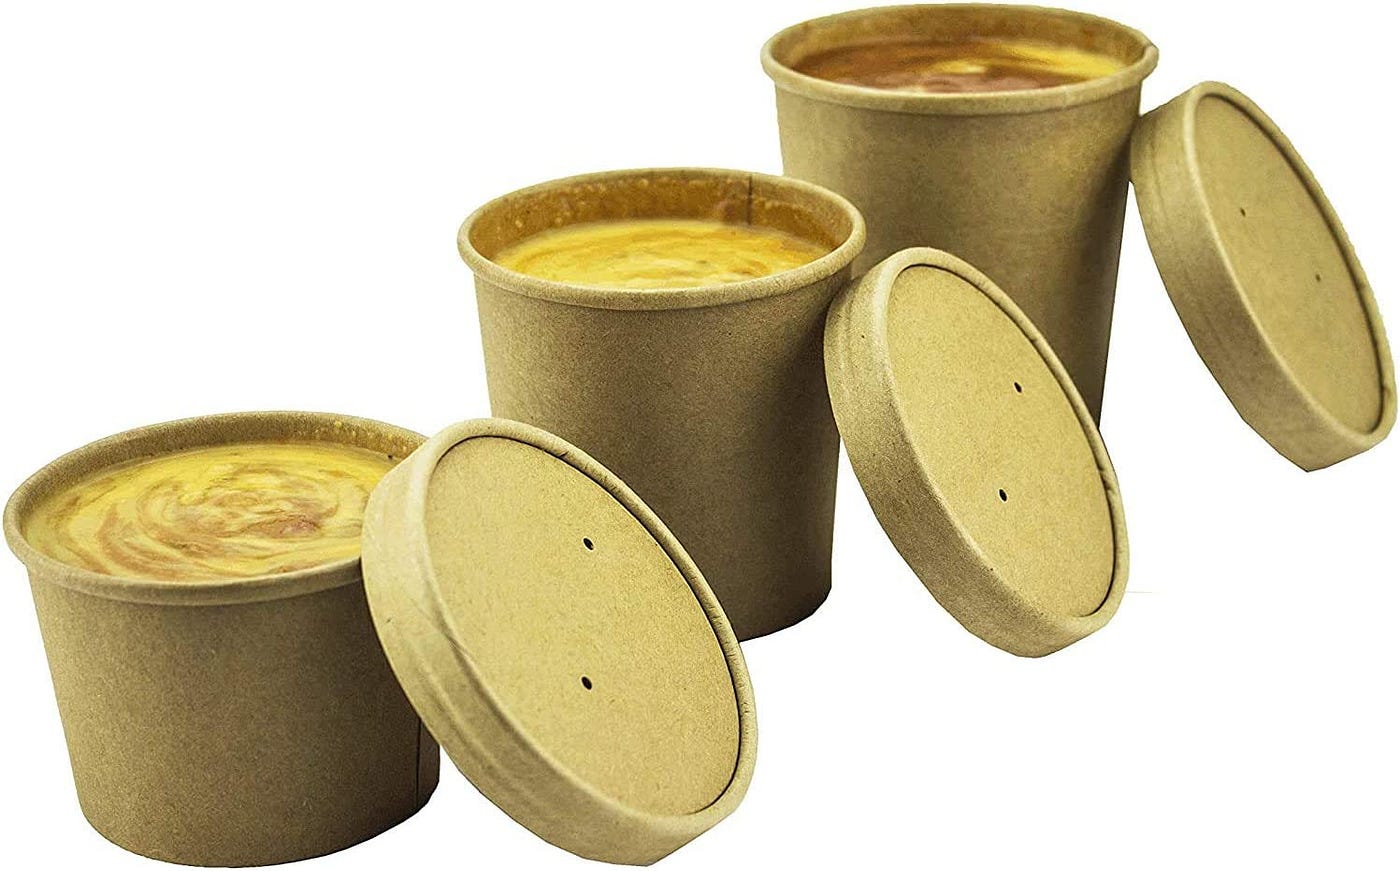 5 types of best disposable paper soup bowls with lids - Aecoz